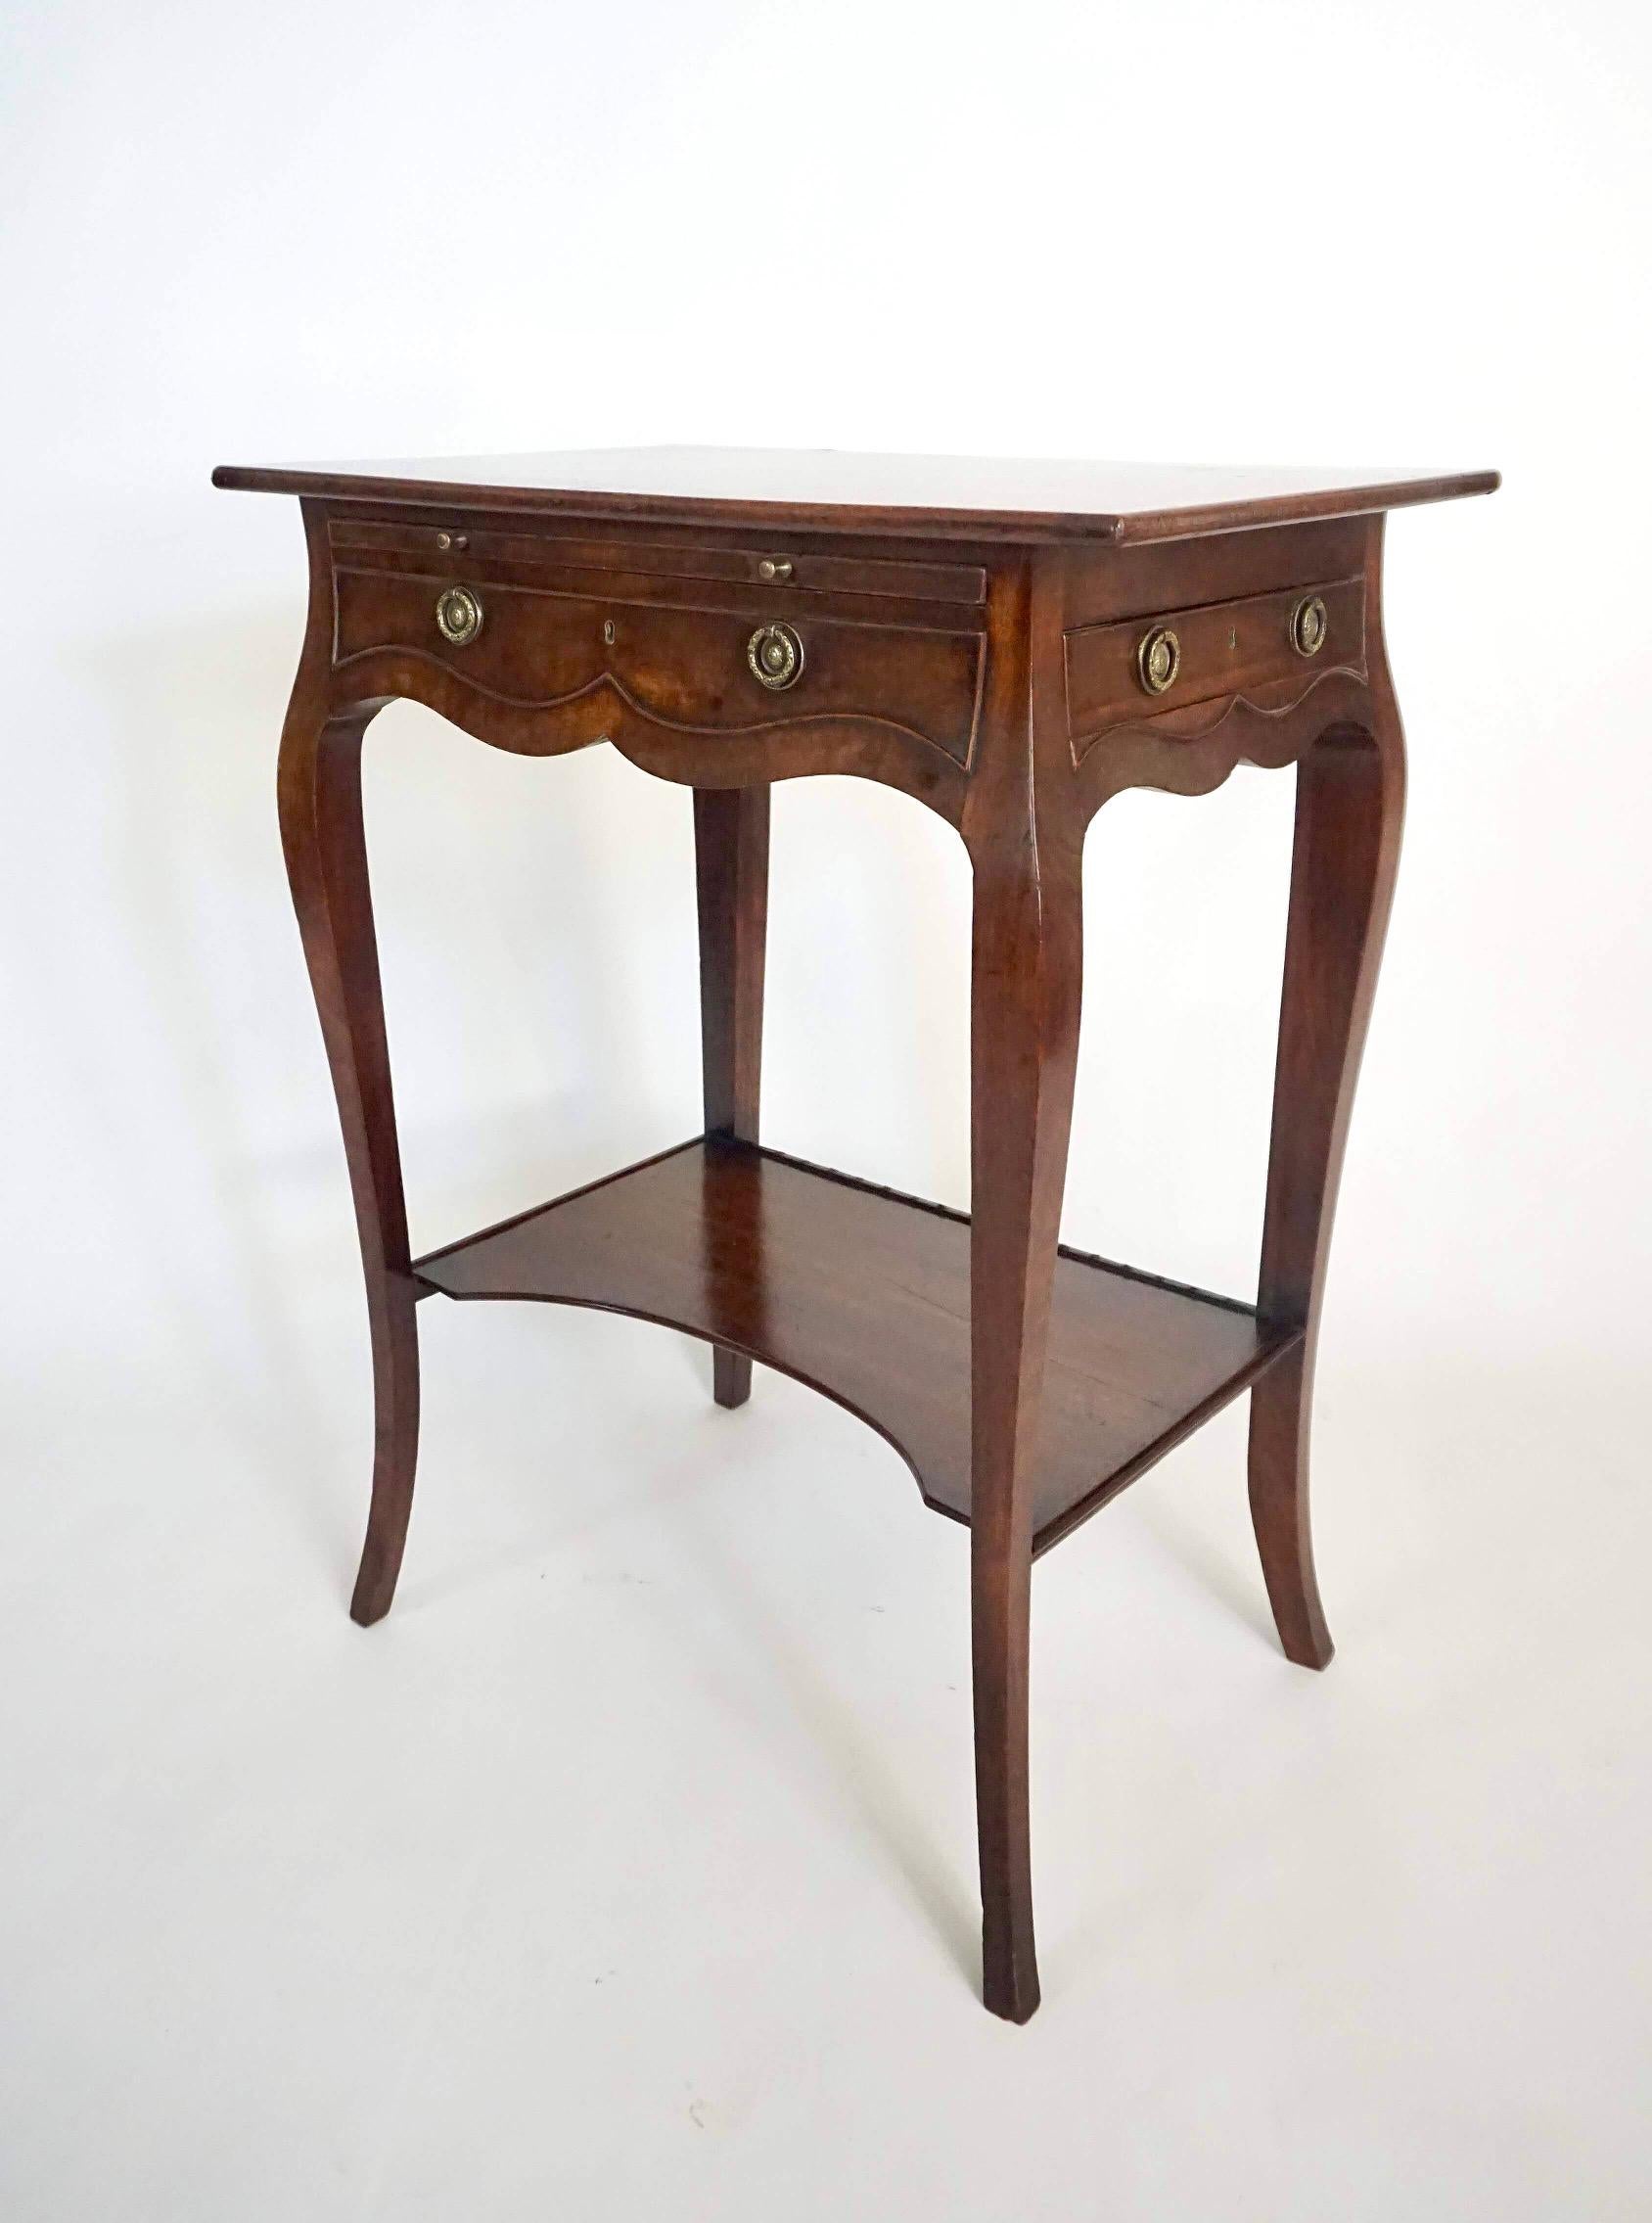 English George III Sabicu & Gonçalo Alves Work Table in the Manner of John Cobb For Sale 1